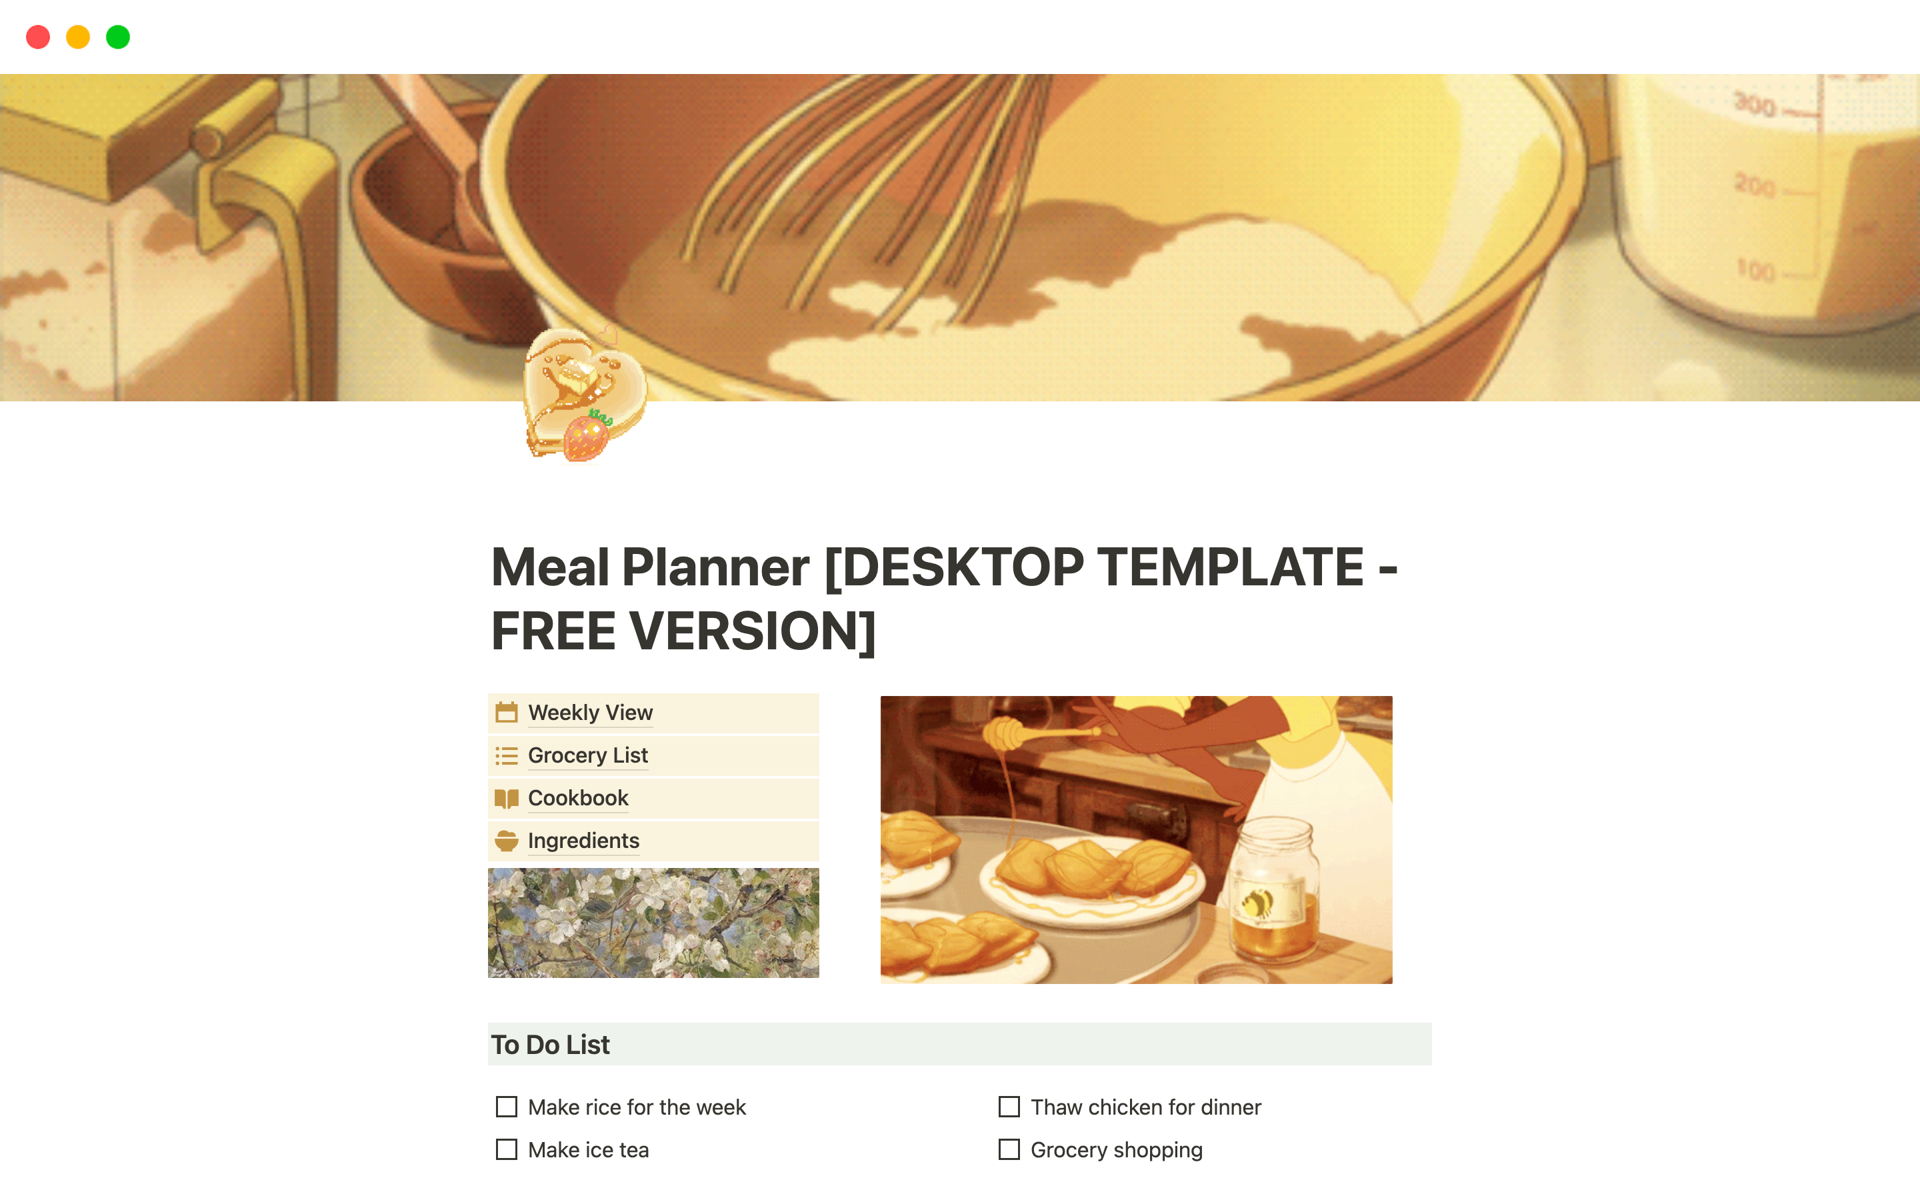 A pre-designed framework that helps individuals organize and plan their meals effectively